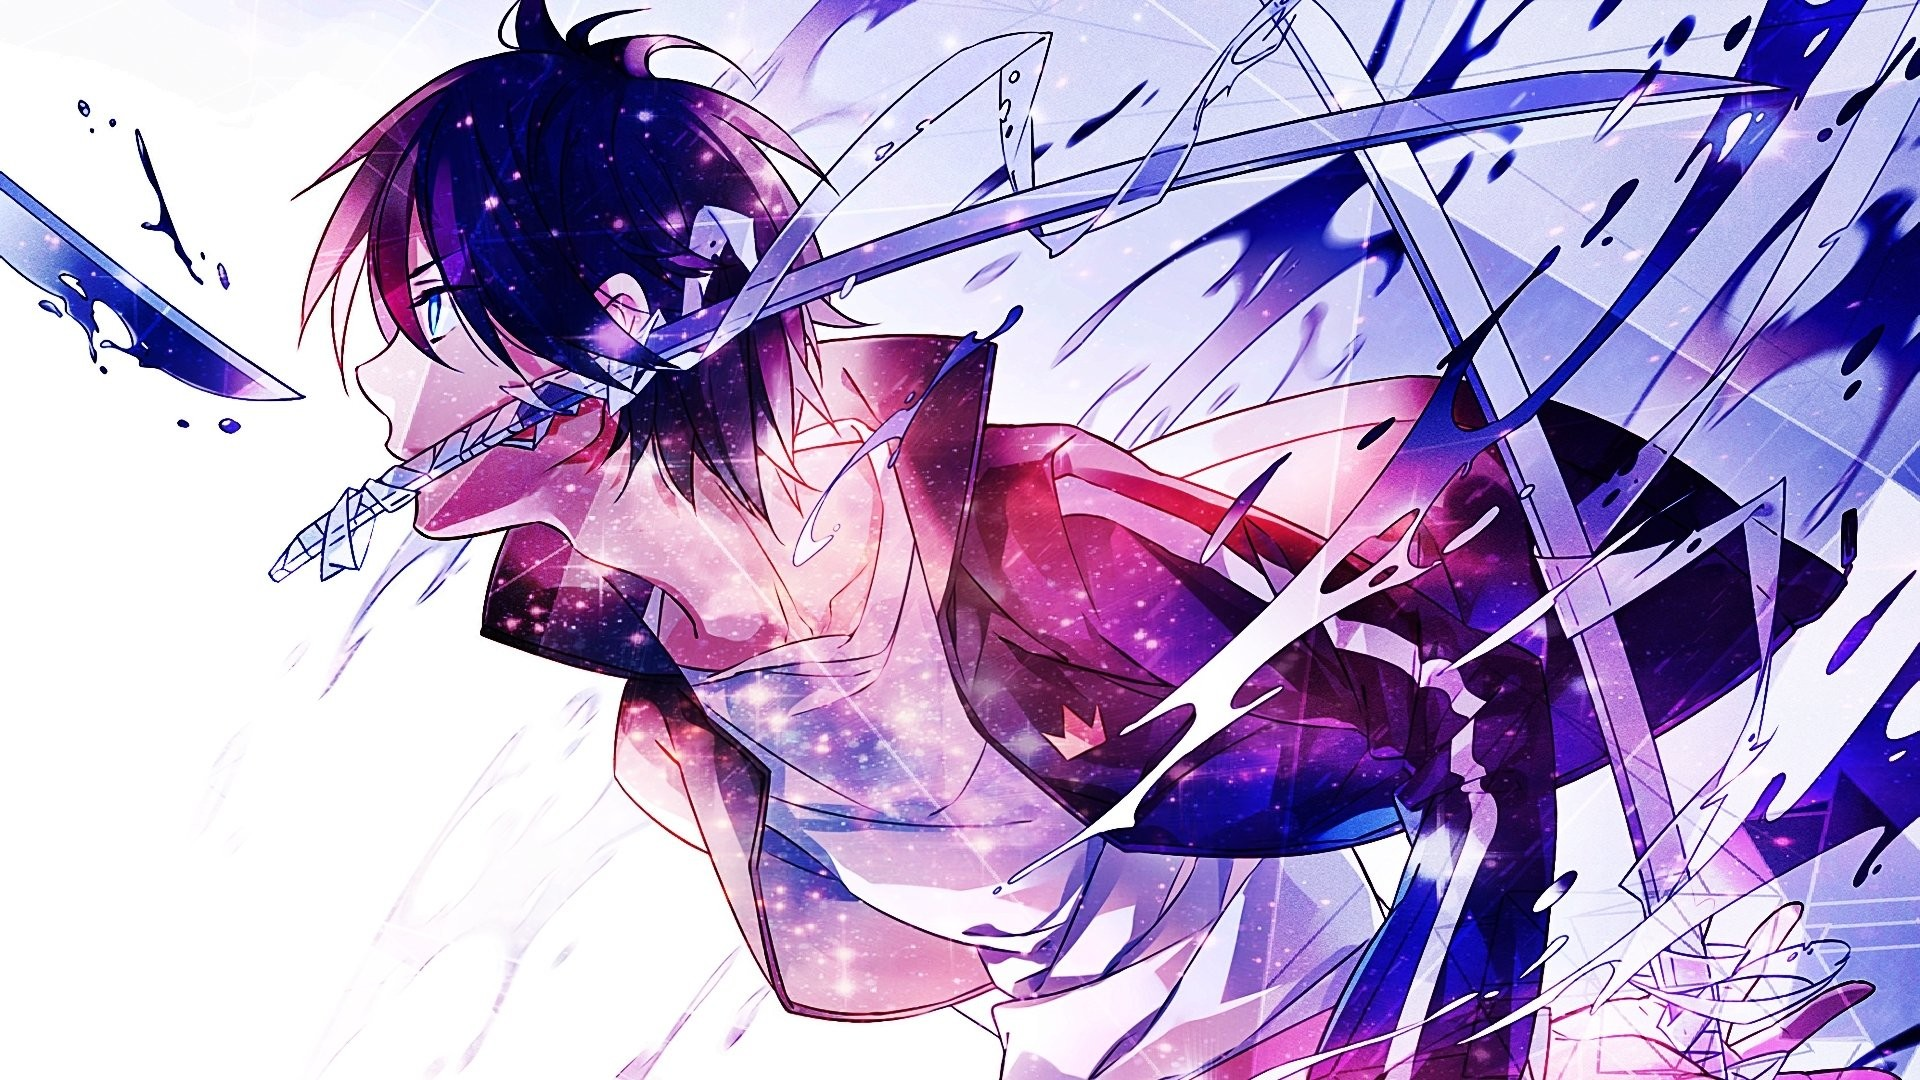 collection image wallpaper: Purple Anime Background 1920x1080. Anime background, Anime wallpaper 1920x Yato noragami